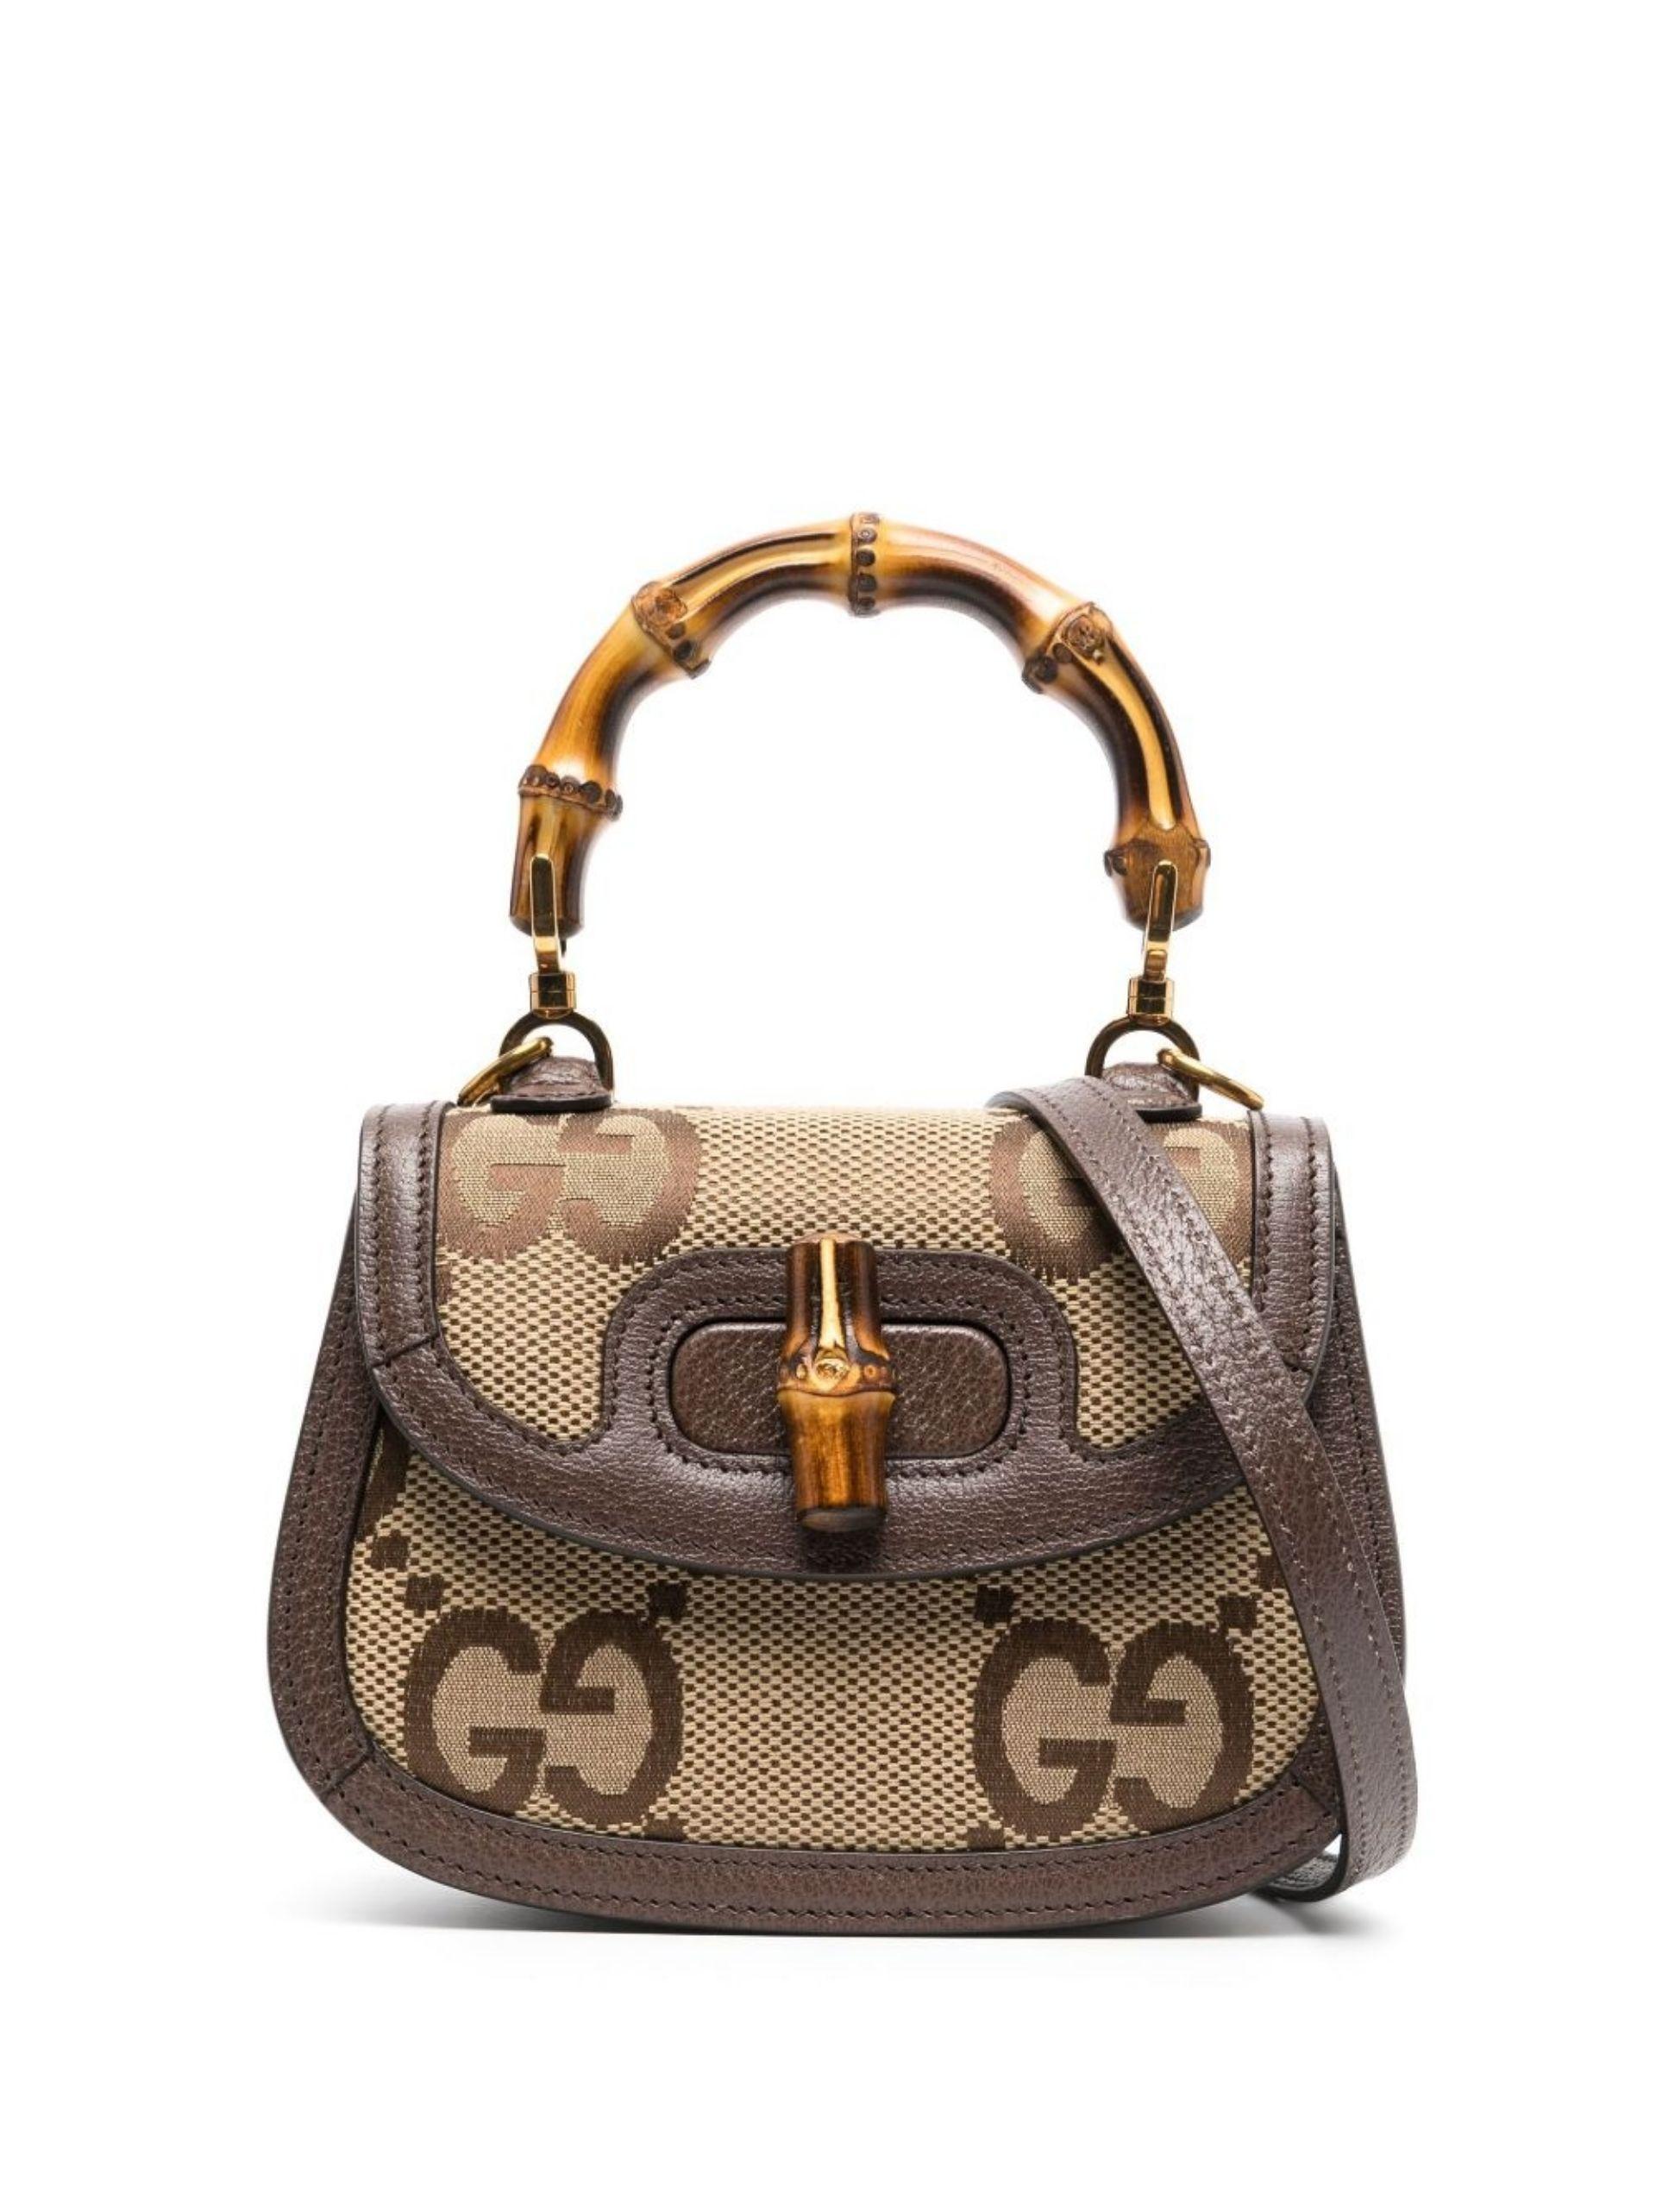 Gucci Jumbo GG Tote Bag Mini Camel/Ebony in Canvas/Leather with Gold-tone -  US